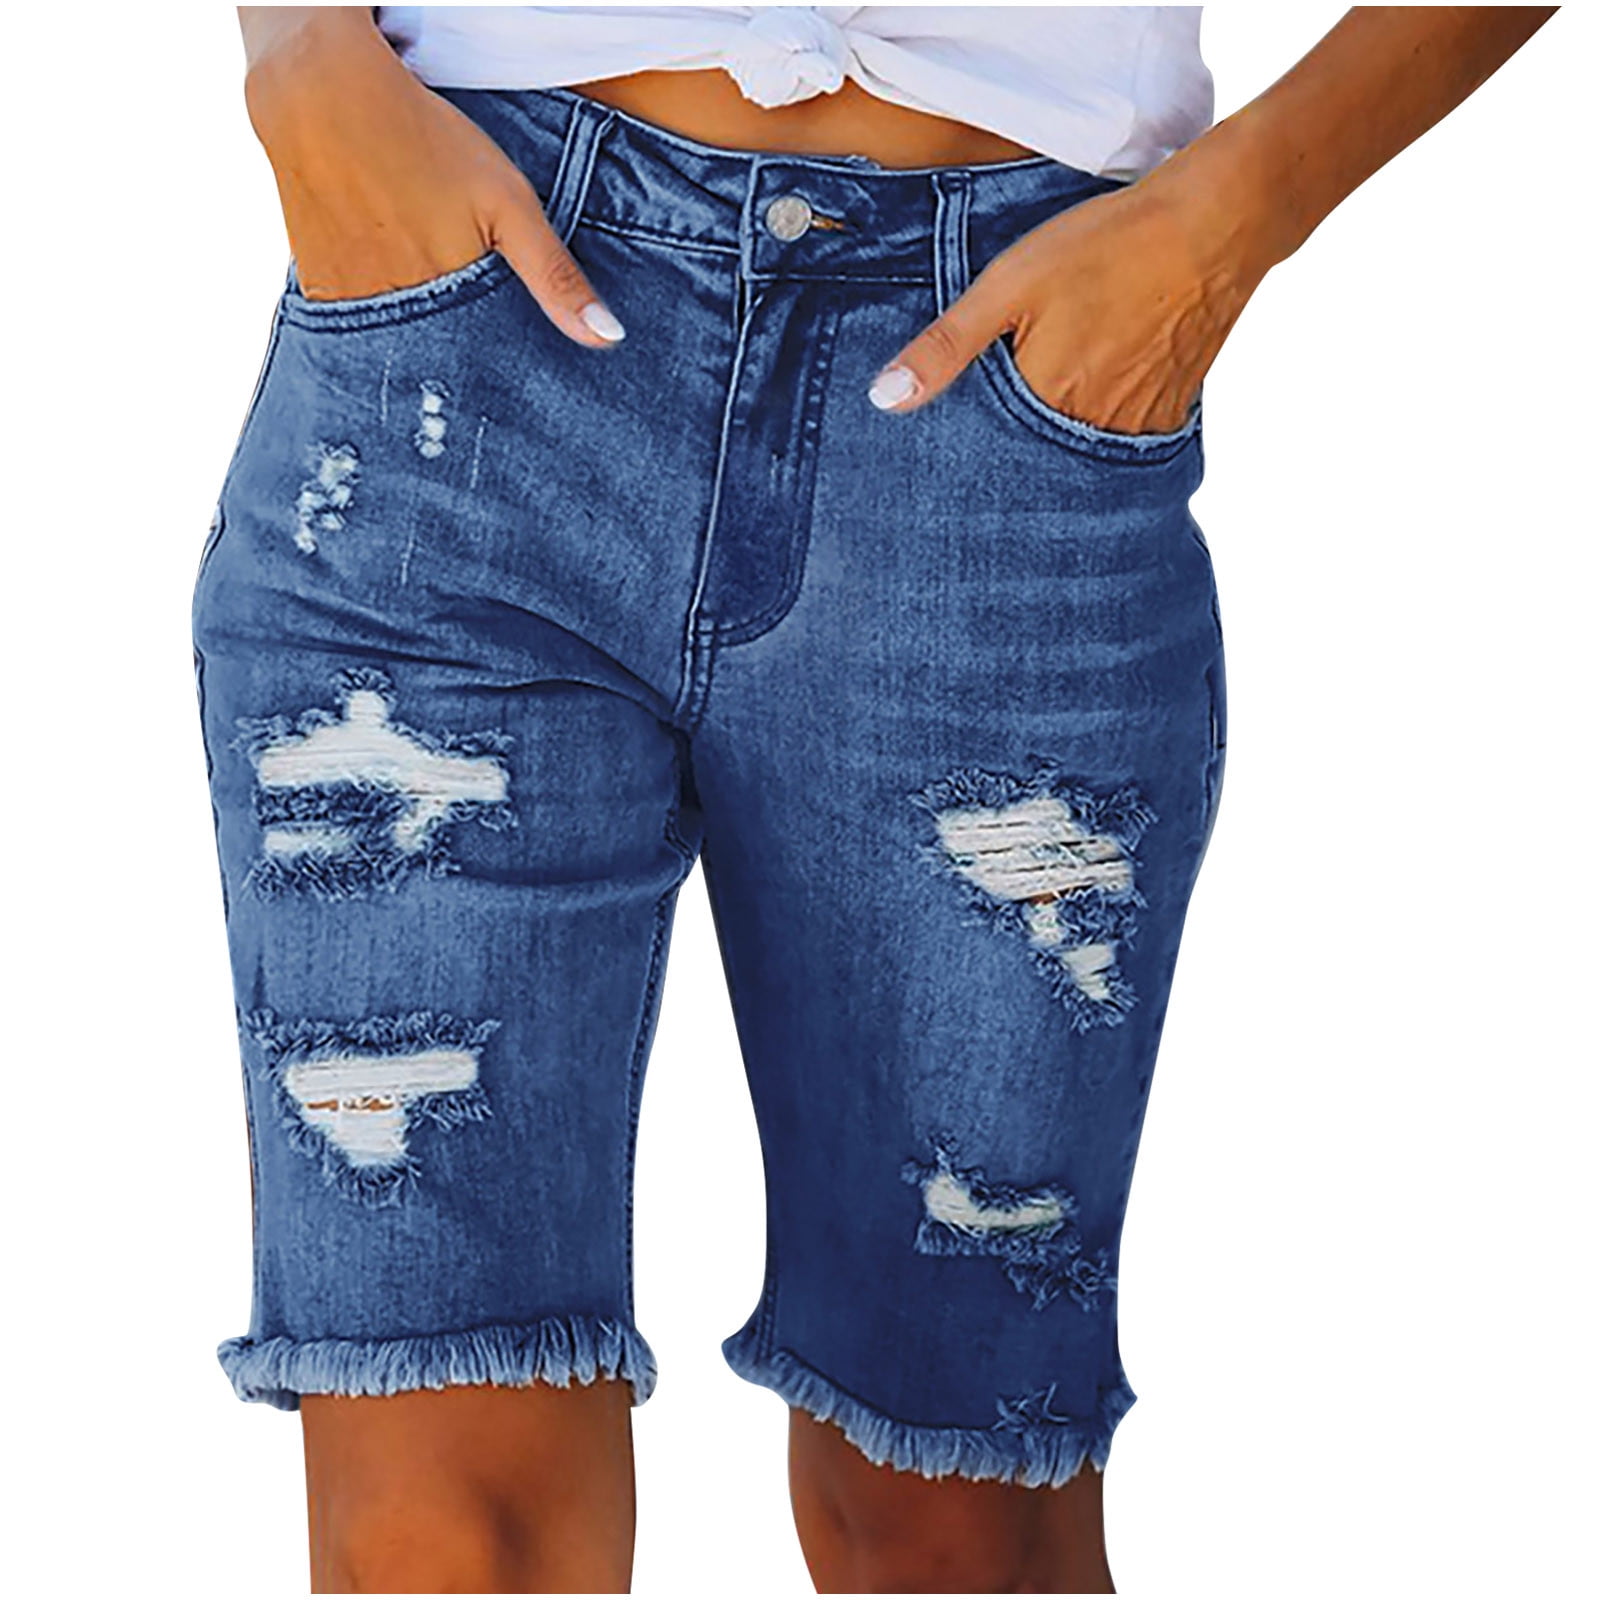 Taqqpue Jean Shorts for Womens High Waisted Stretchy Denim Shorts ...